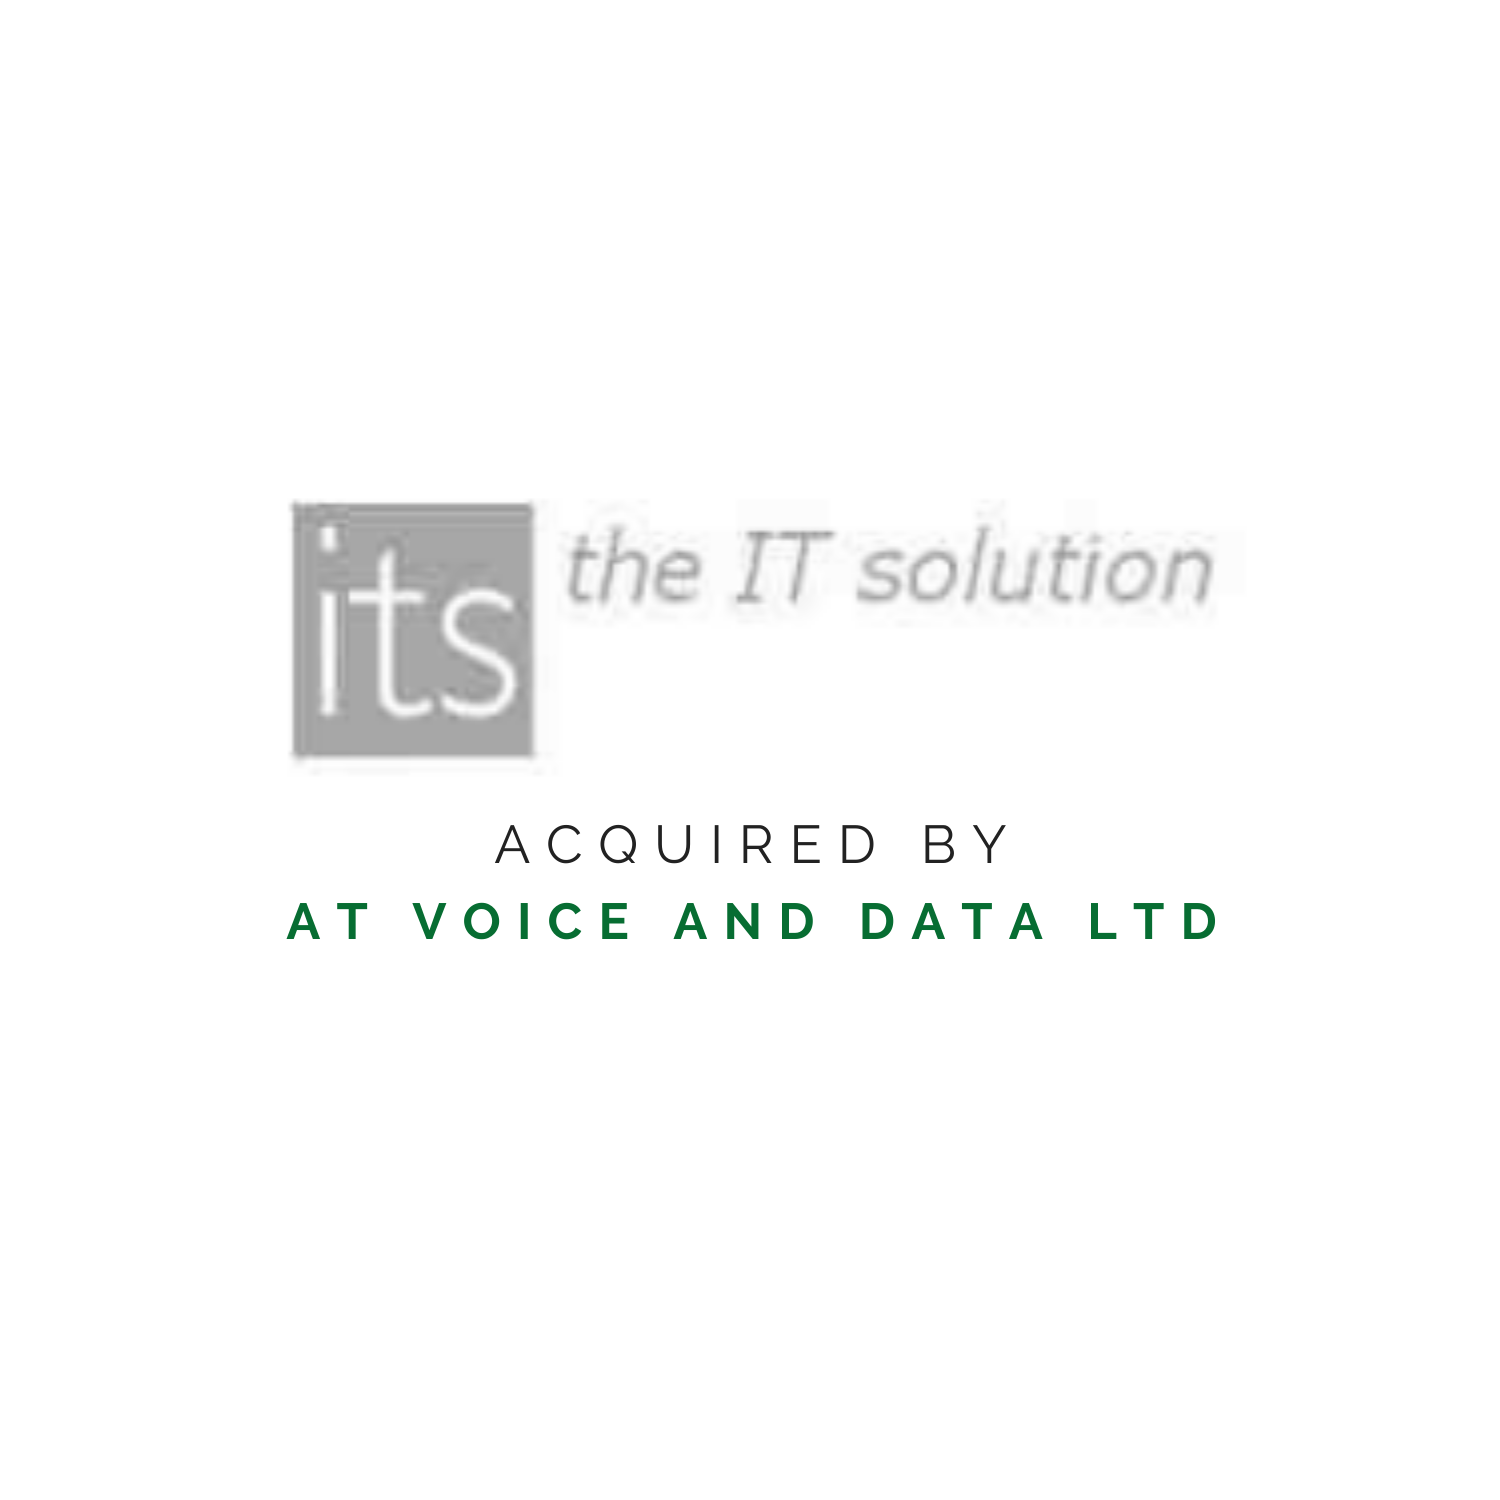 Sale of IT Support and Telecommunications Company